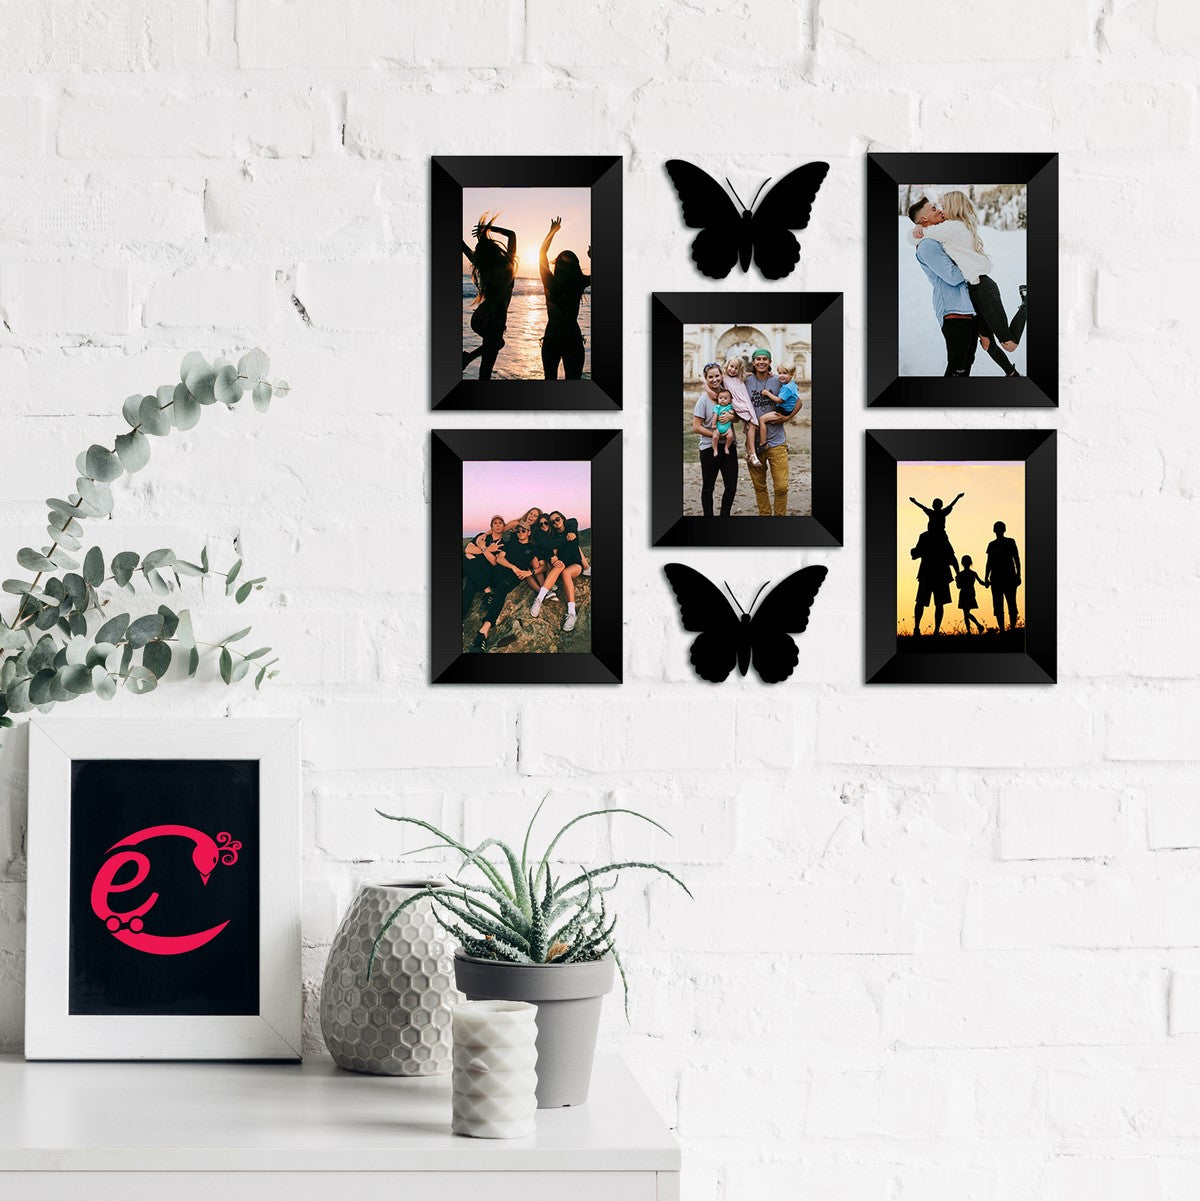 Memory Wall Collage Photo Frame - Set of 5 Photo Frames for 5 Photos of 5"x7", 2 Pieces of BUTTERFLIES 1